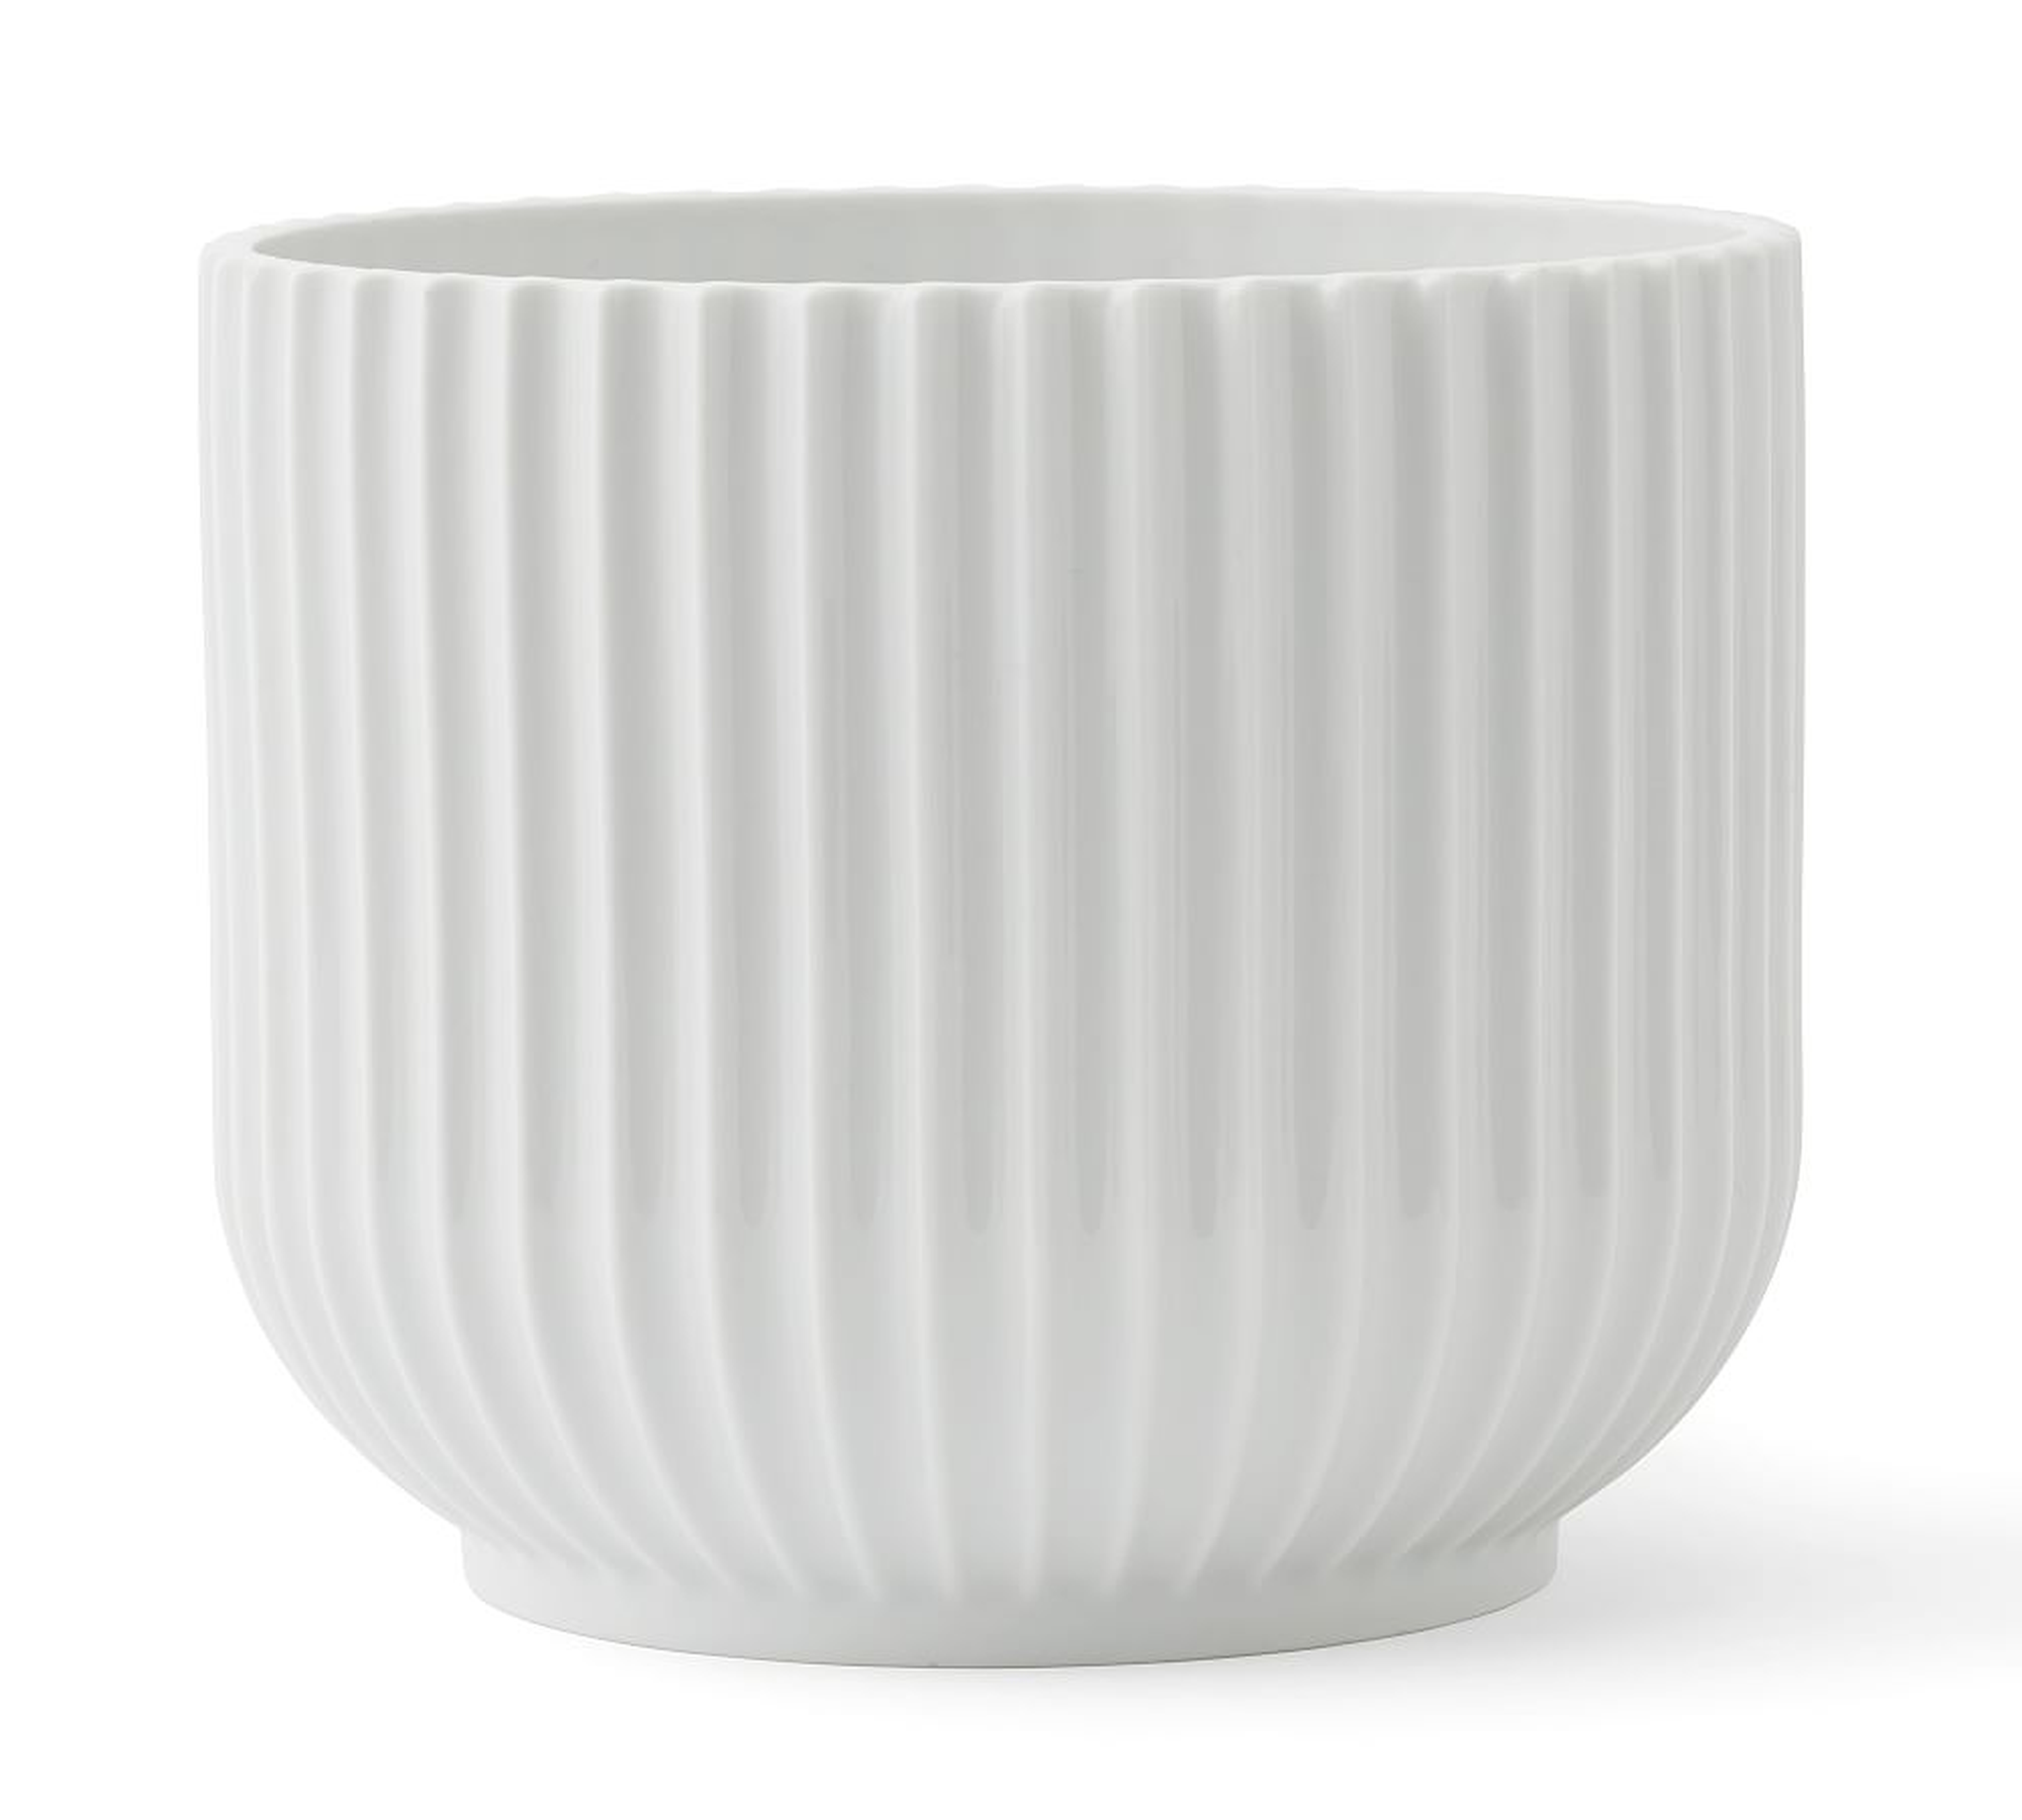 Lyngby Porcelain Planters, Large, White - Pottery Barn